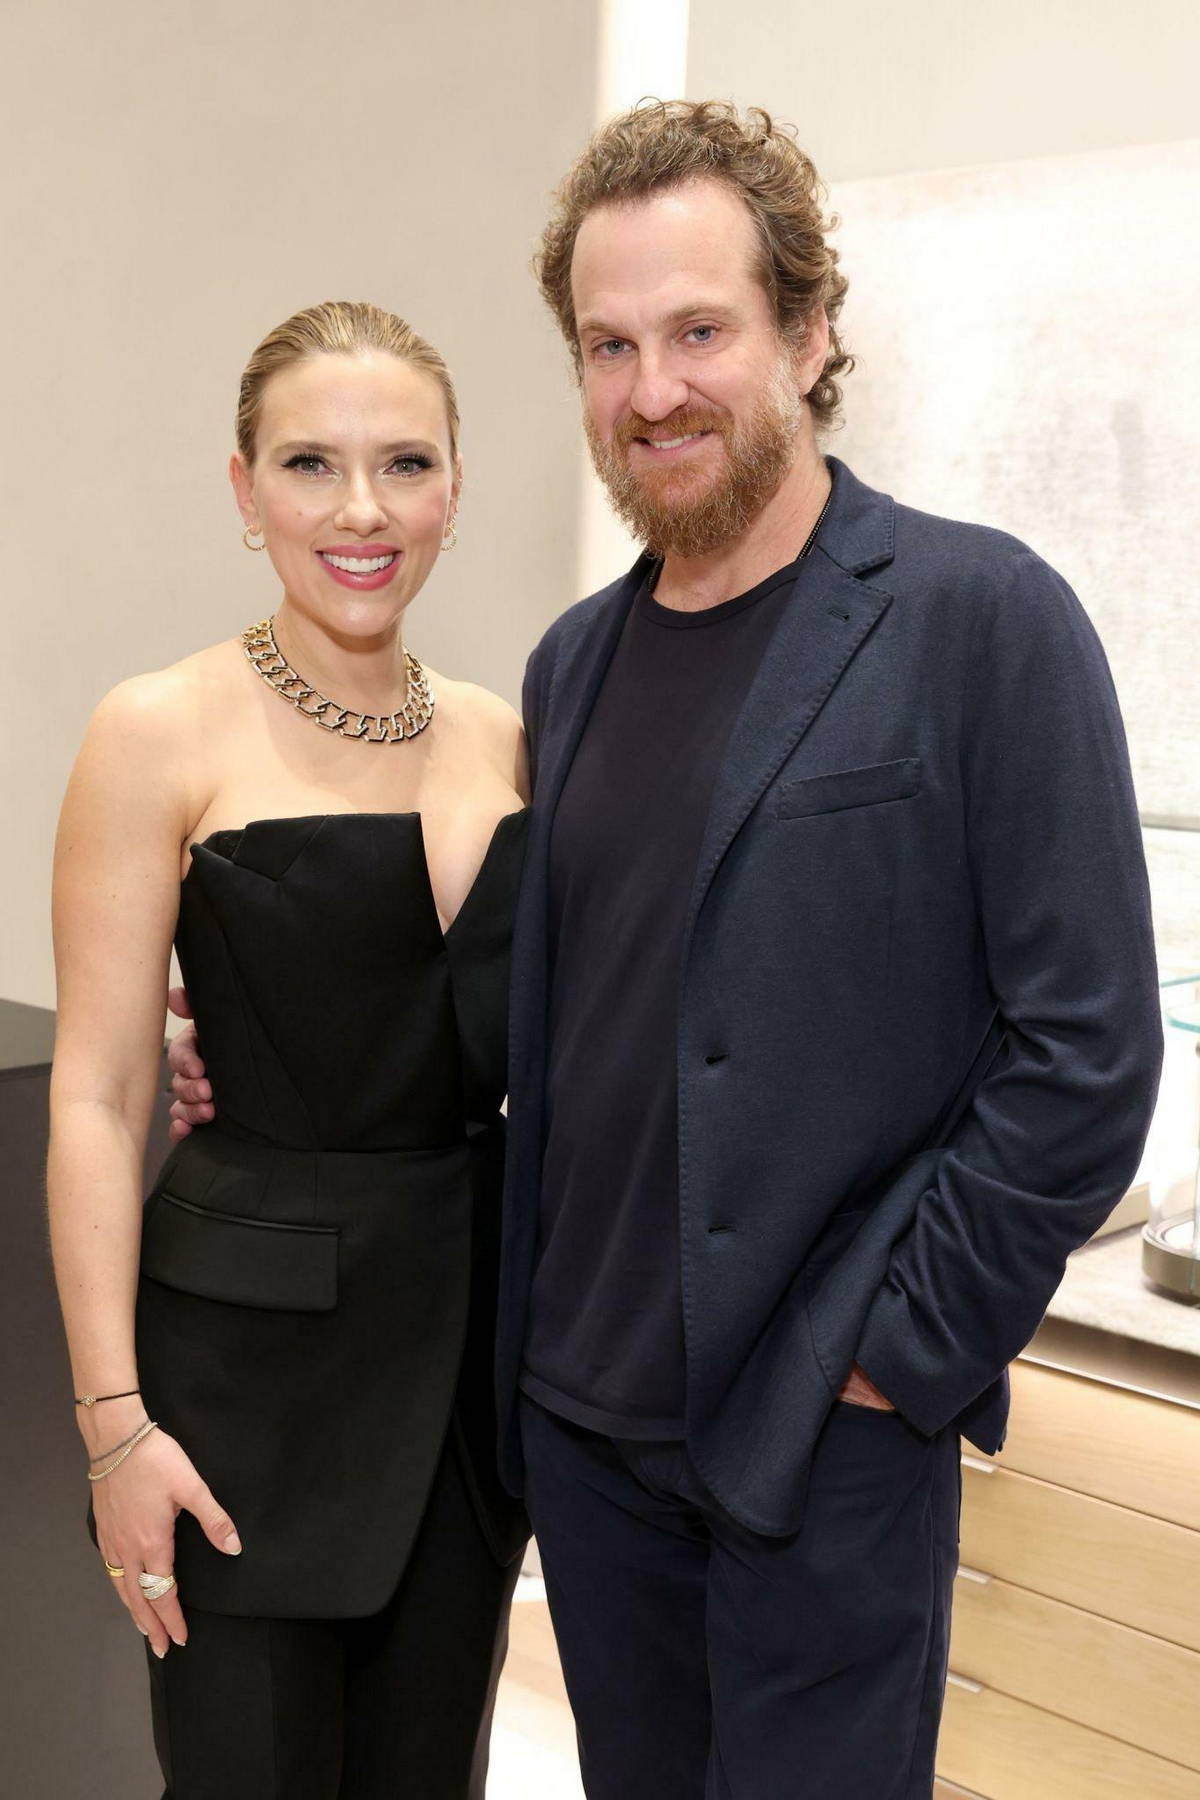 scarlett johansson attends an event hosted by david yurman in support of lower eastside girls club in new york city-021122_22